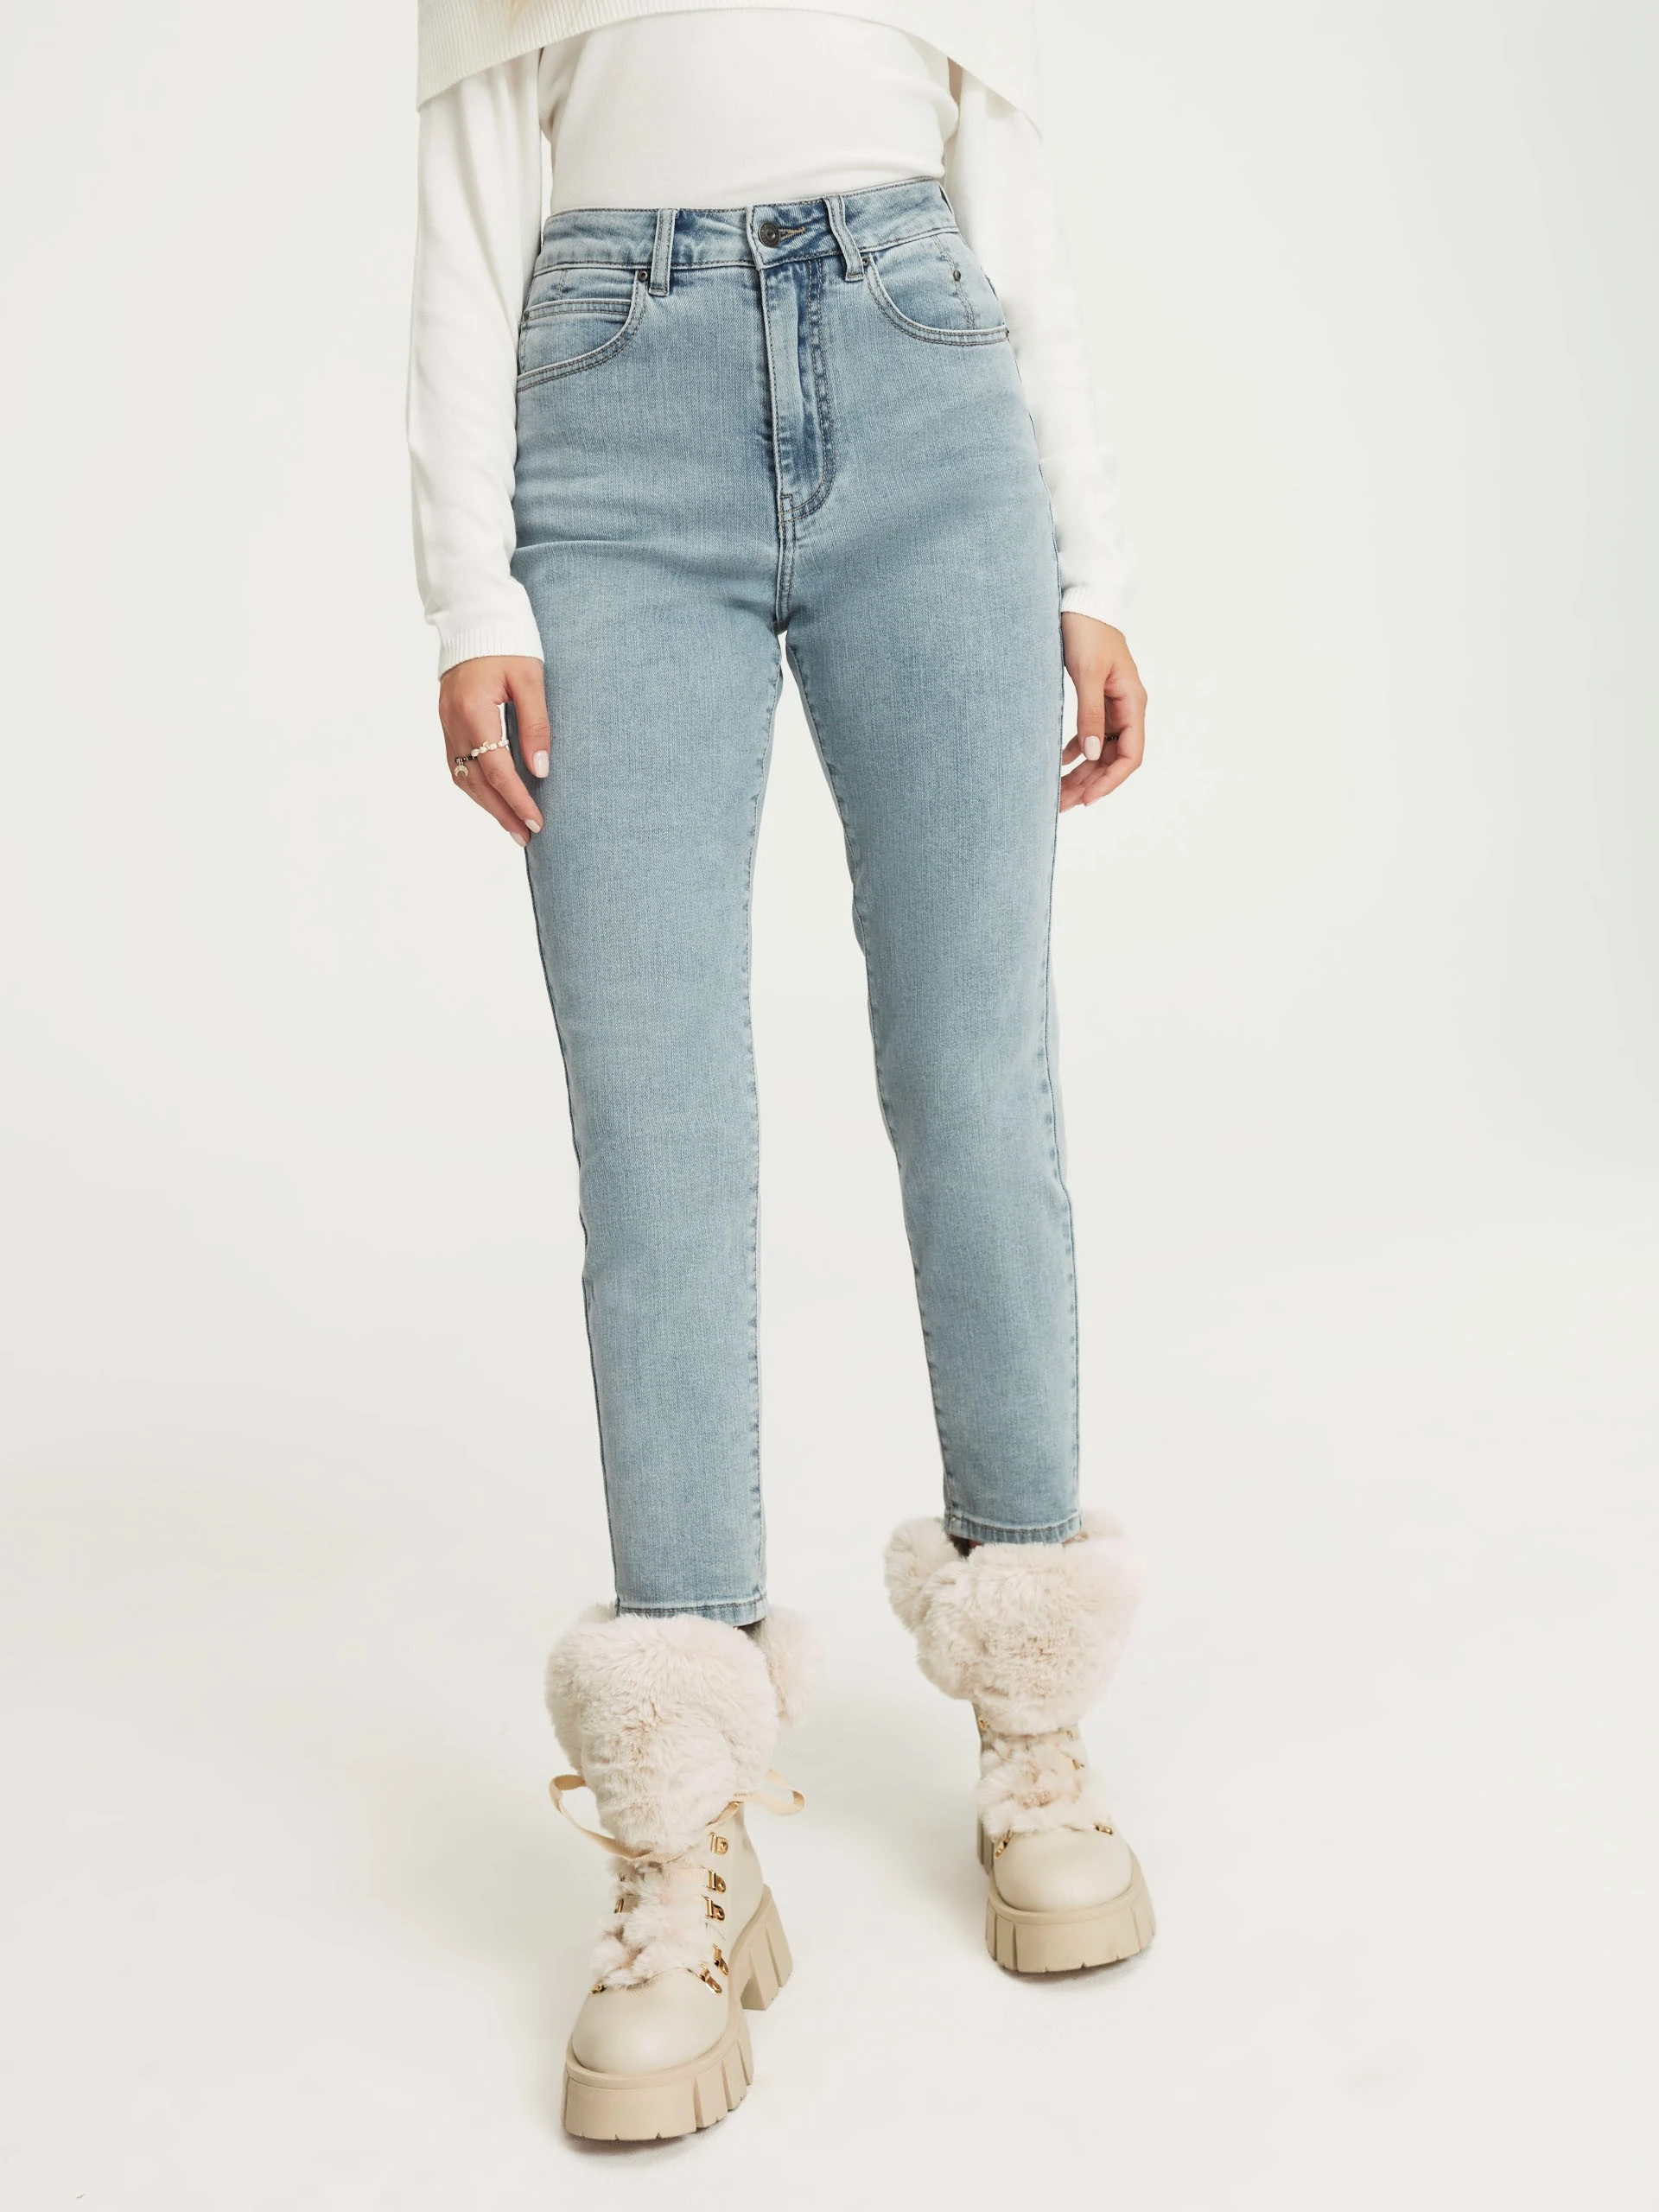 Fitted light jeans